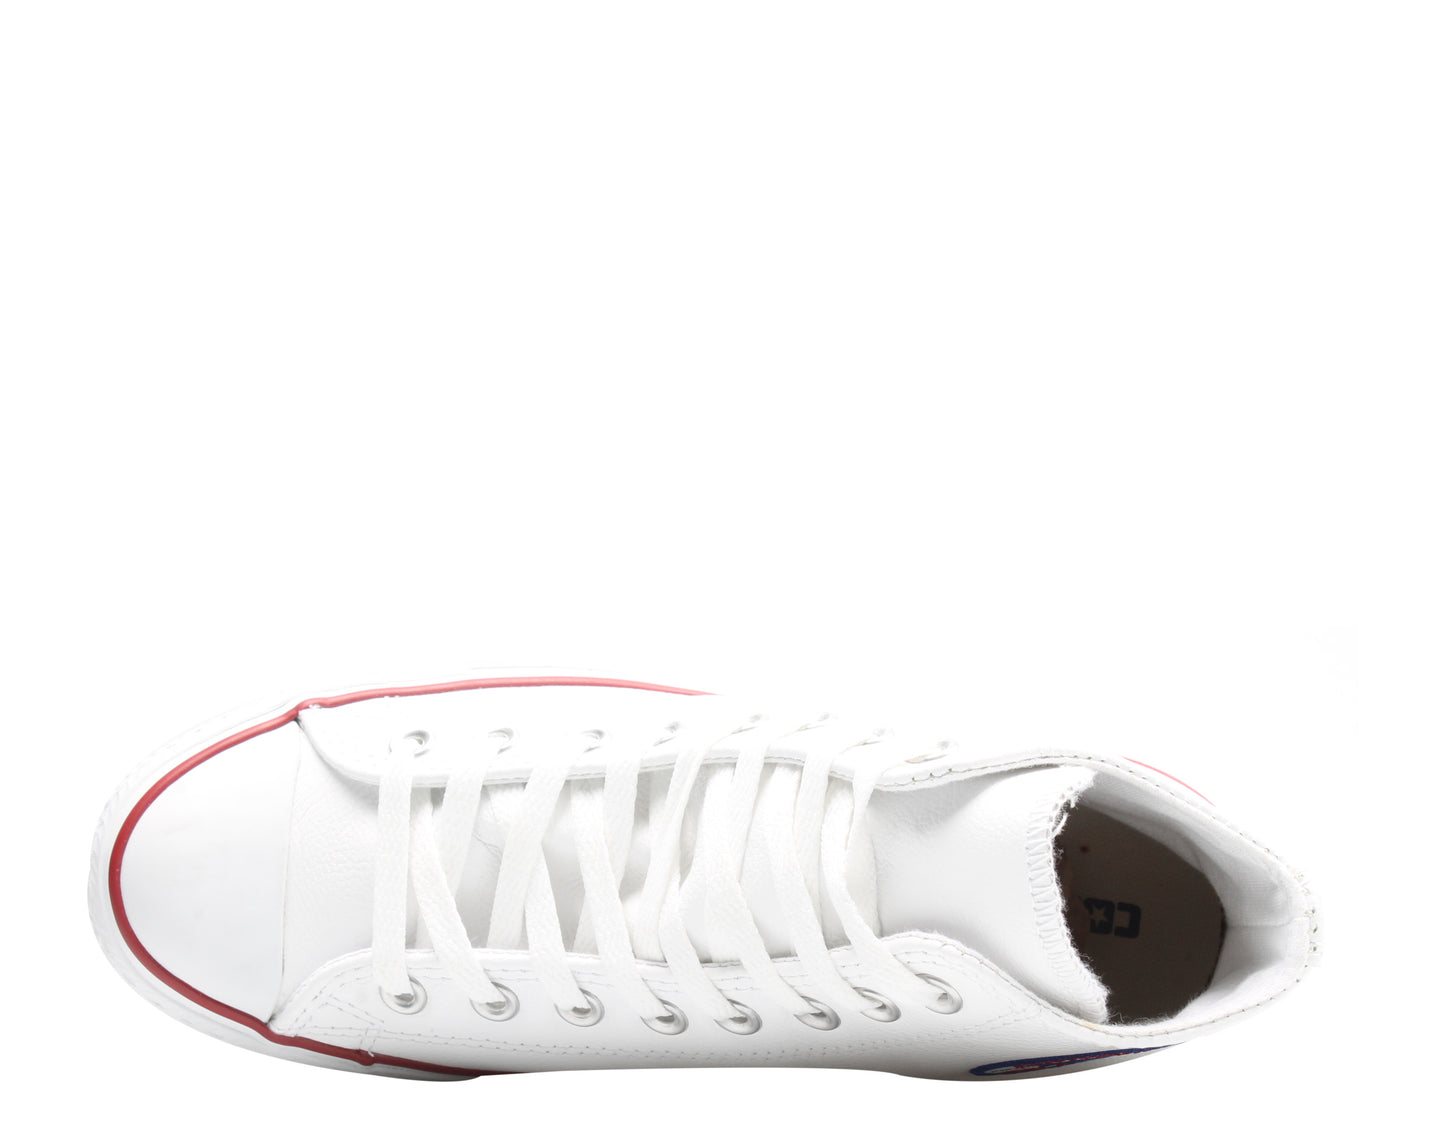 Converse Chuck Taylor All Star Leather Hi Sneakers